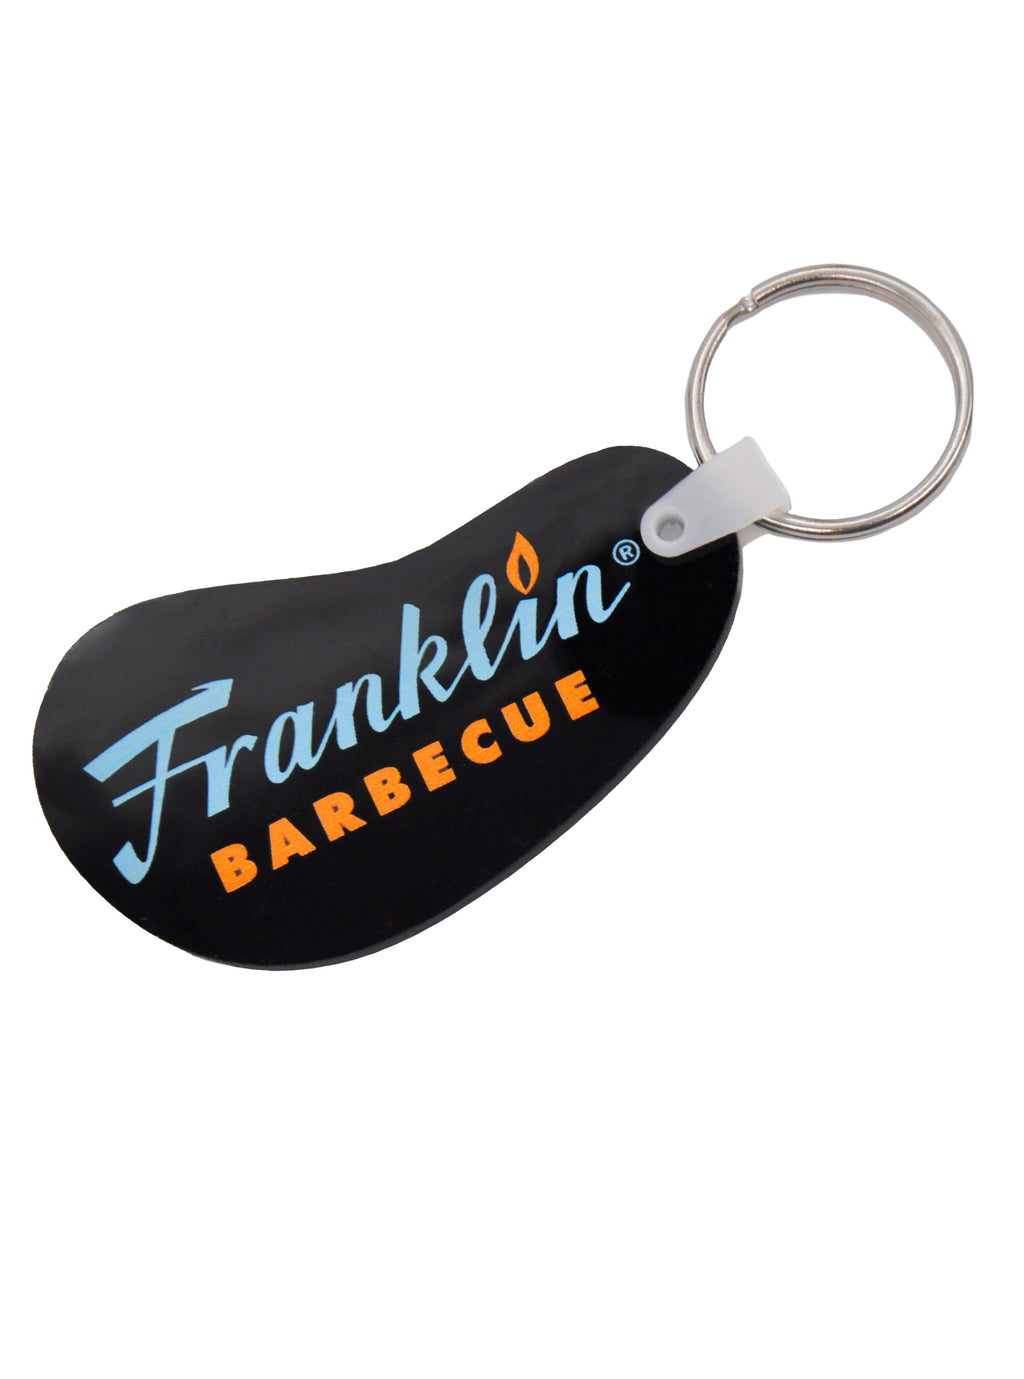 Black bean shaped vinyl keychain with blue and orange Franklin Barbecue logo. A silver metal key ring on the right side.